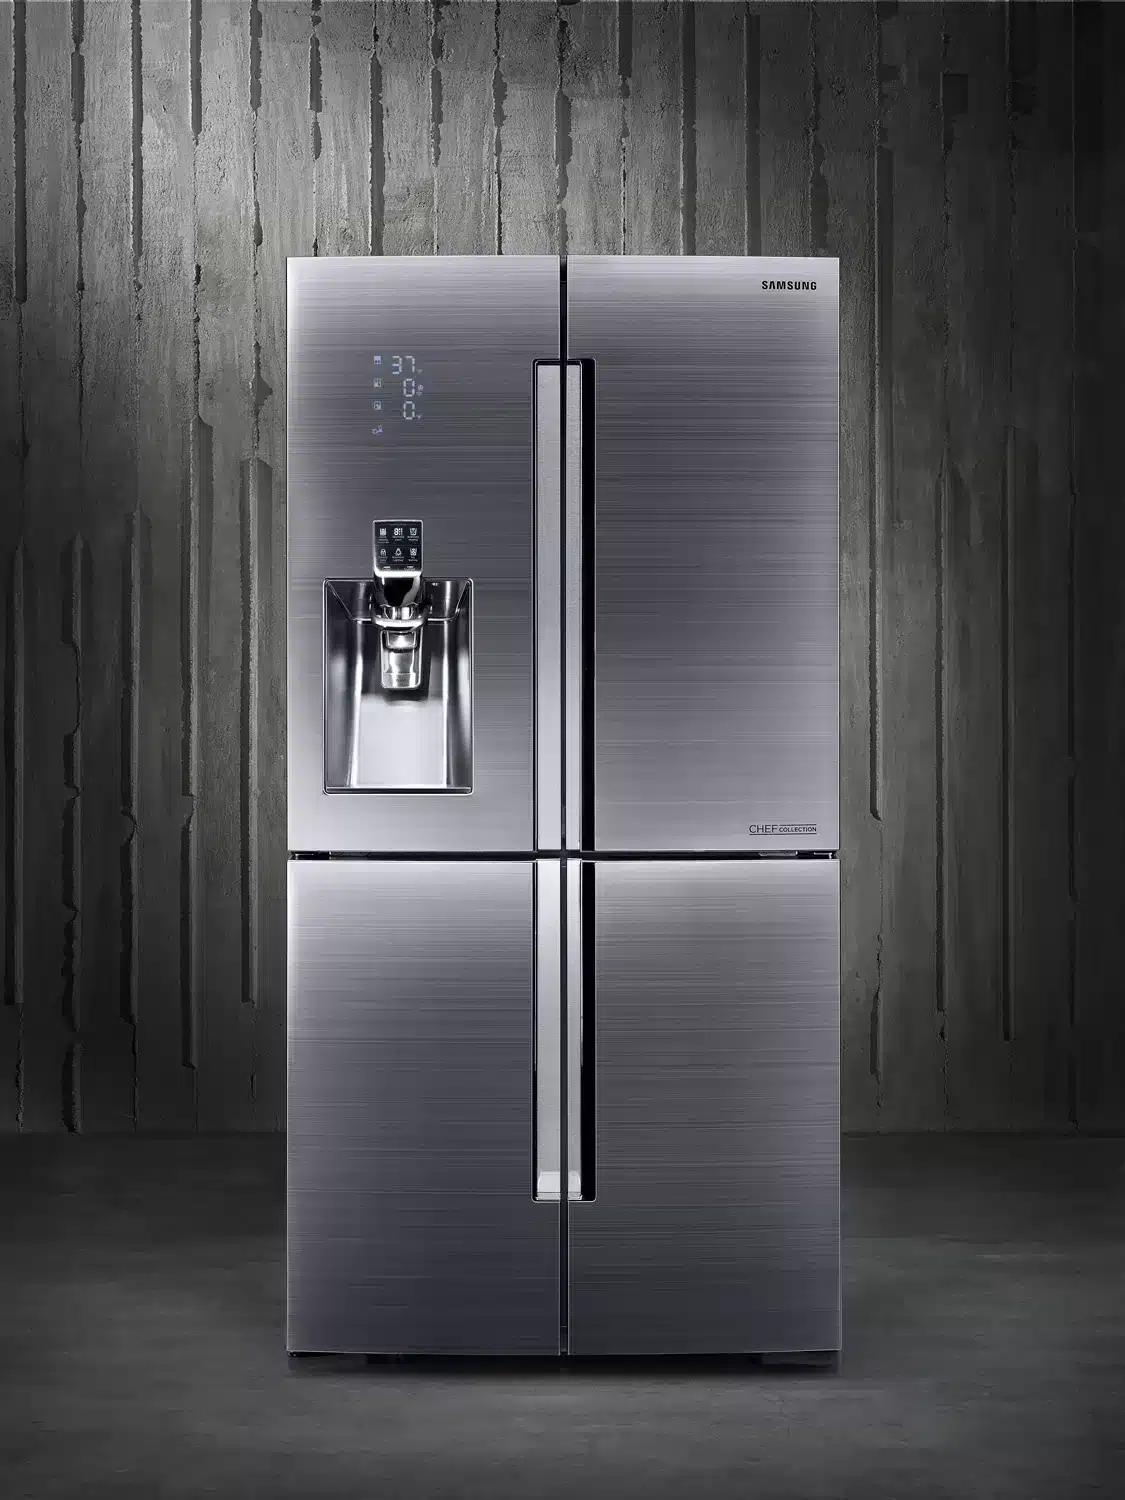 how-to-fix-samsung-fridge-thats-just-not-cooling